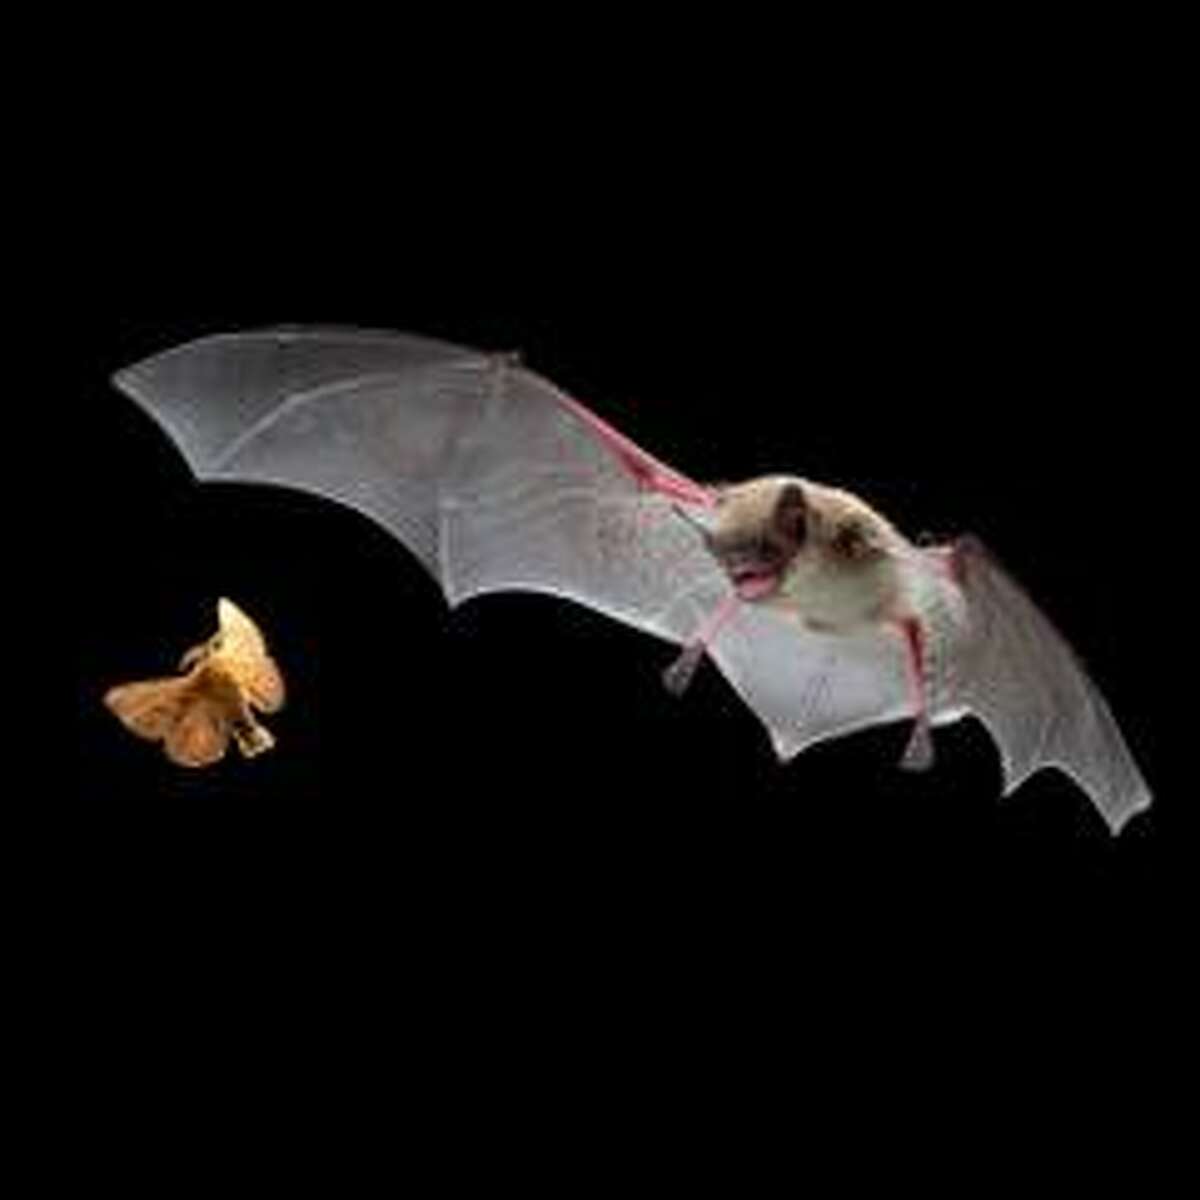 There are 1450-plus species world wild, but most people know little about them. Because bats are nocturnal, people tend to think of them as evil demons lurking in the night that drink your blood, carry diseases such as rabies, and scoop down to bite you and get in your hair. In reality, bats contract rabies far less than other animals. Less than half of 1 percent of all bats may contract the disease.